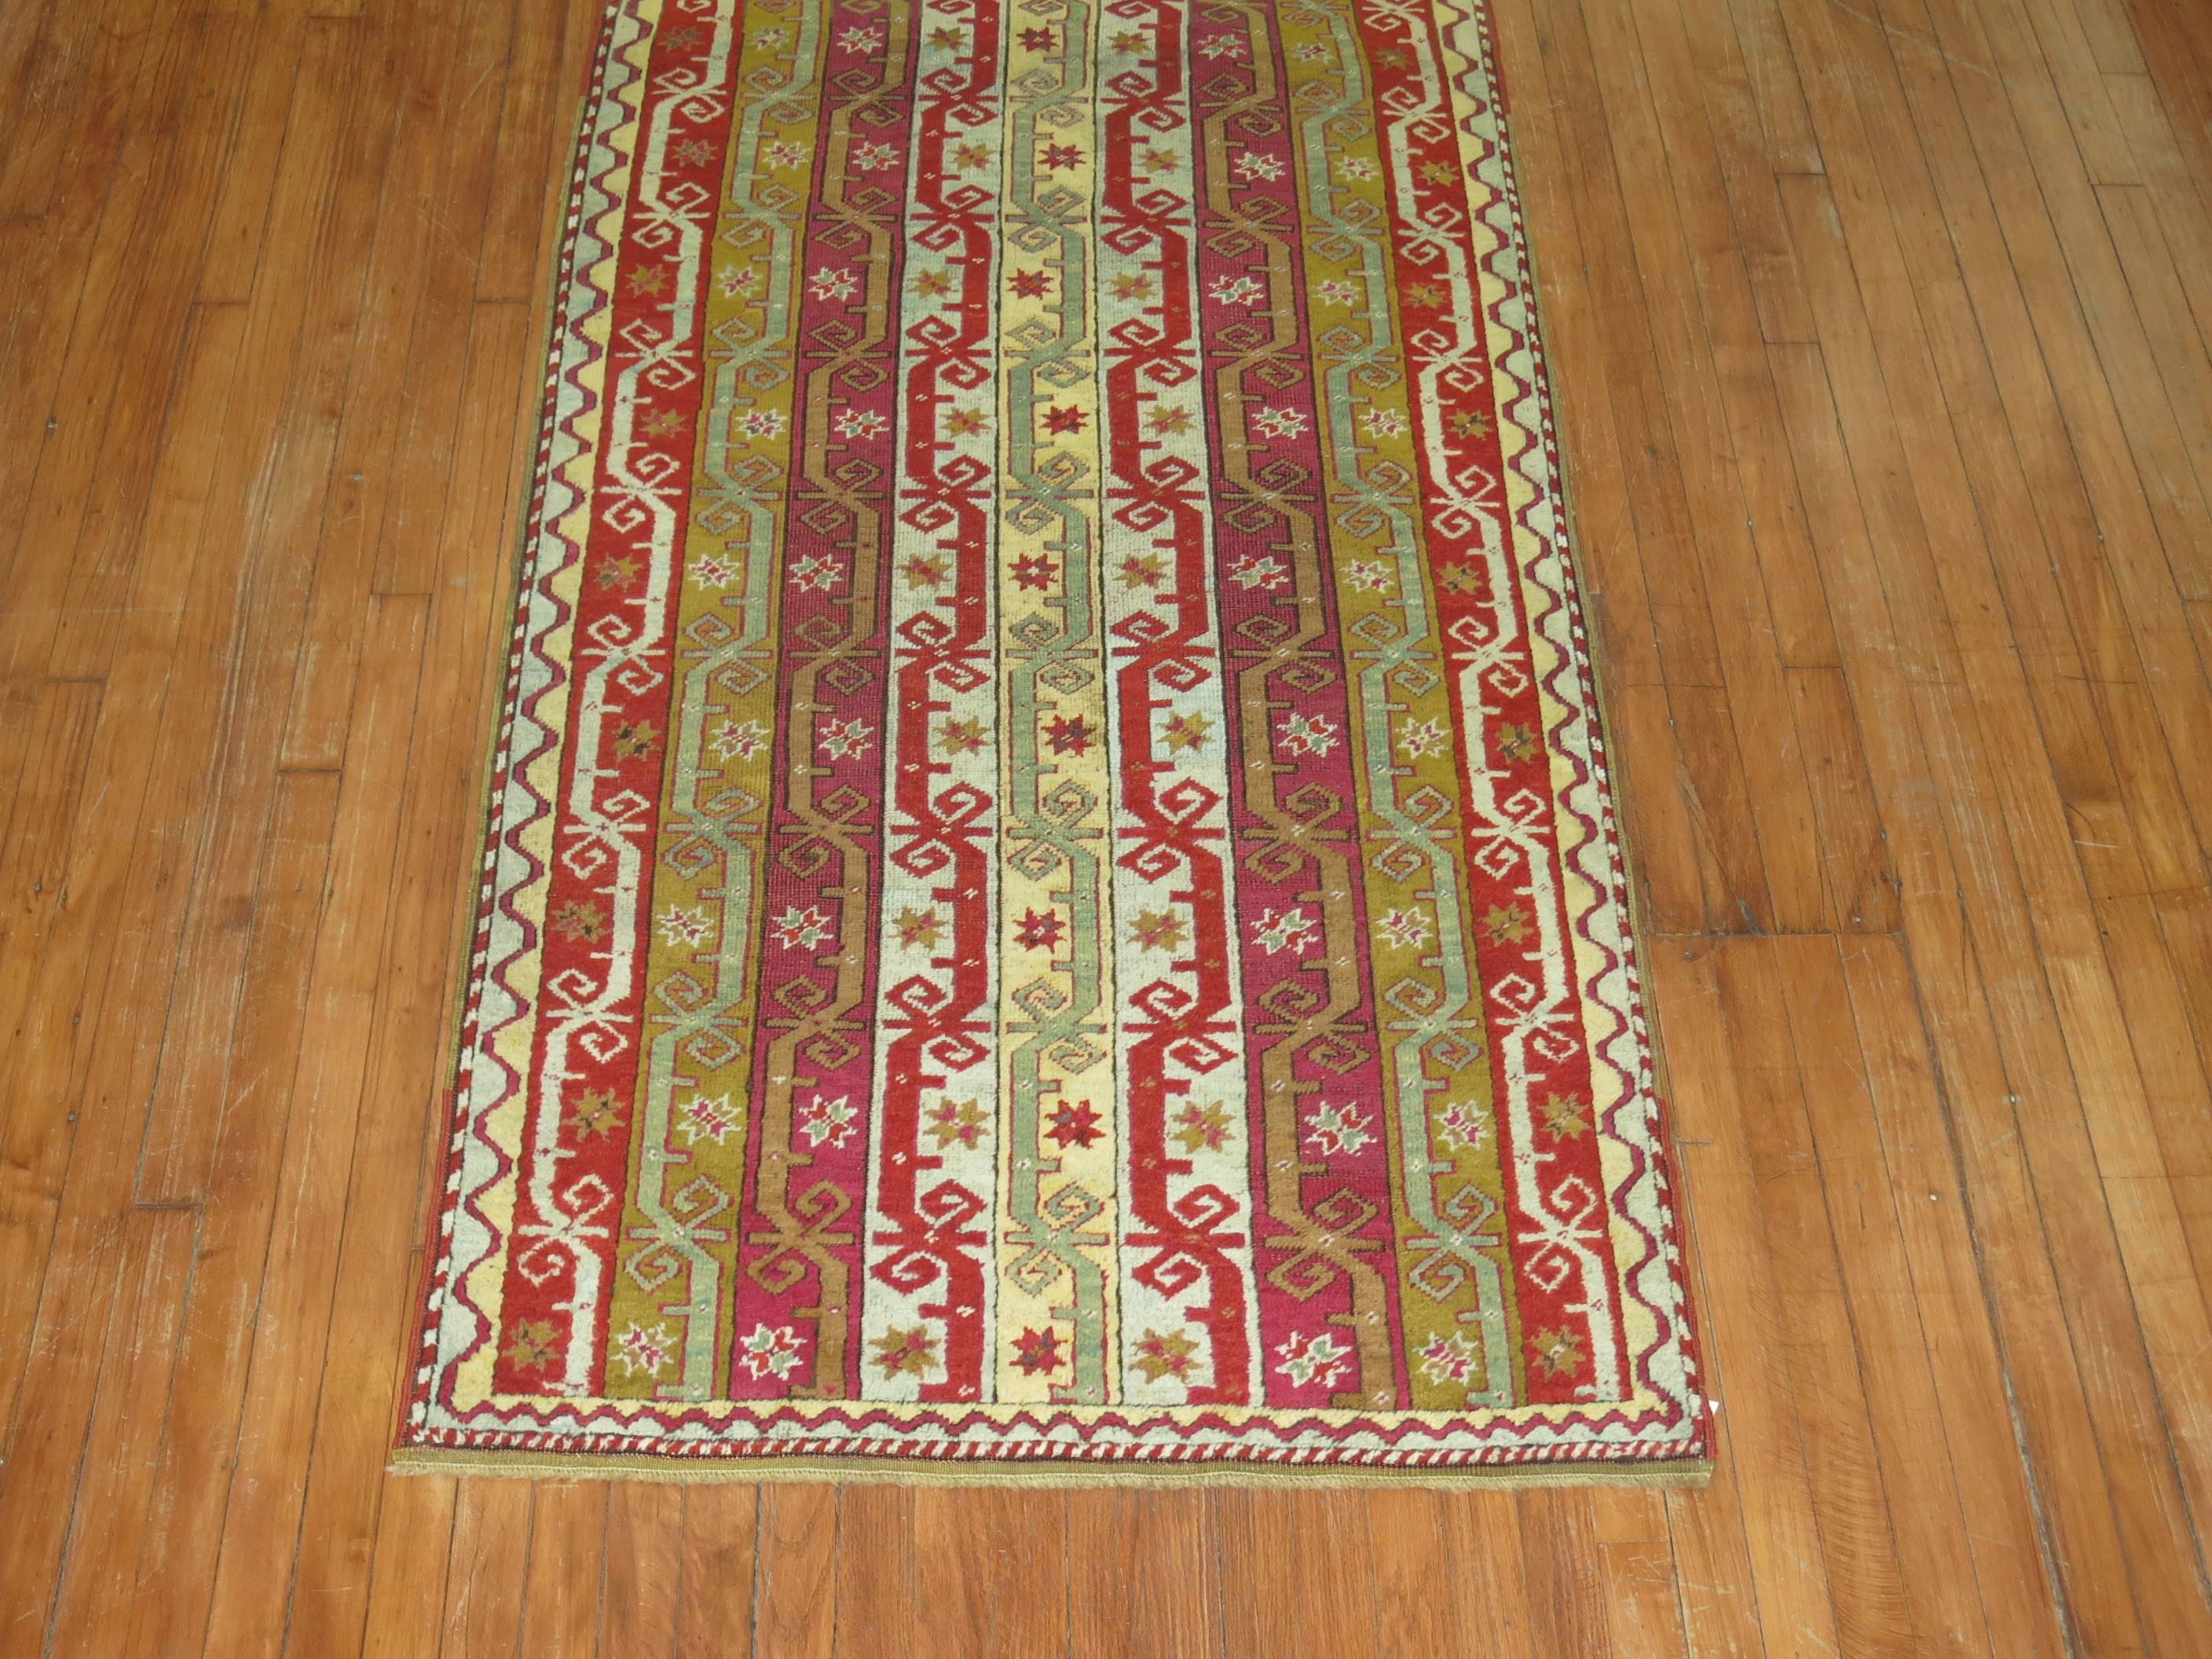 An authentic one of a kind Turkish Ghiordes long runner.

Ghiordes weavings from Northwest Turkey have a long and distinguished history. These particular rugs are known especially for high quality prayer rugs of early date with exceptionally